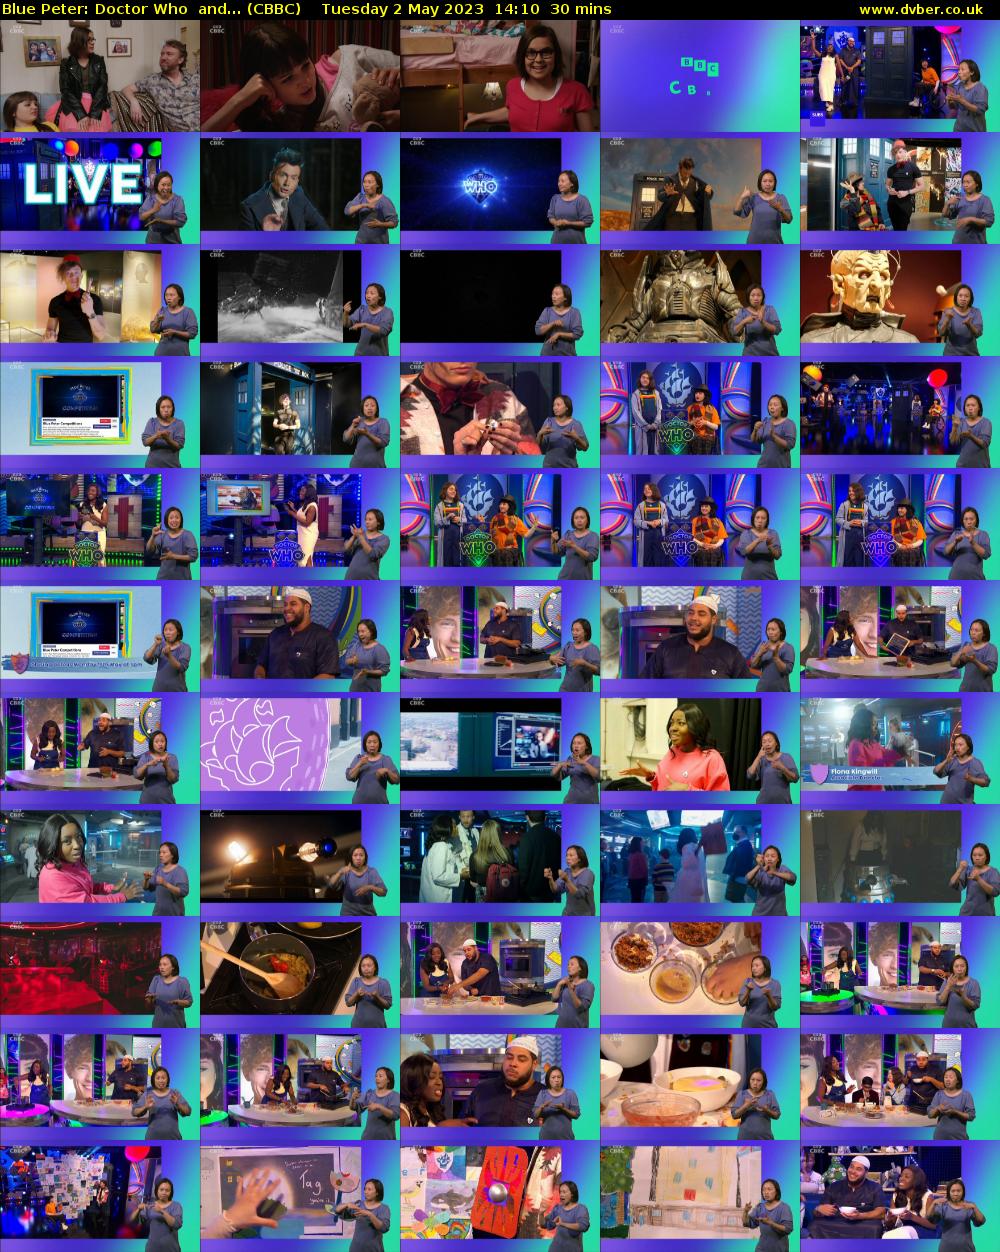 Blue Peter: Doctor Who  and... (CBBC) Tuesday 2 May 2023 14:10 - 14:40